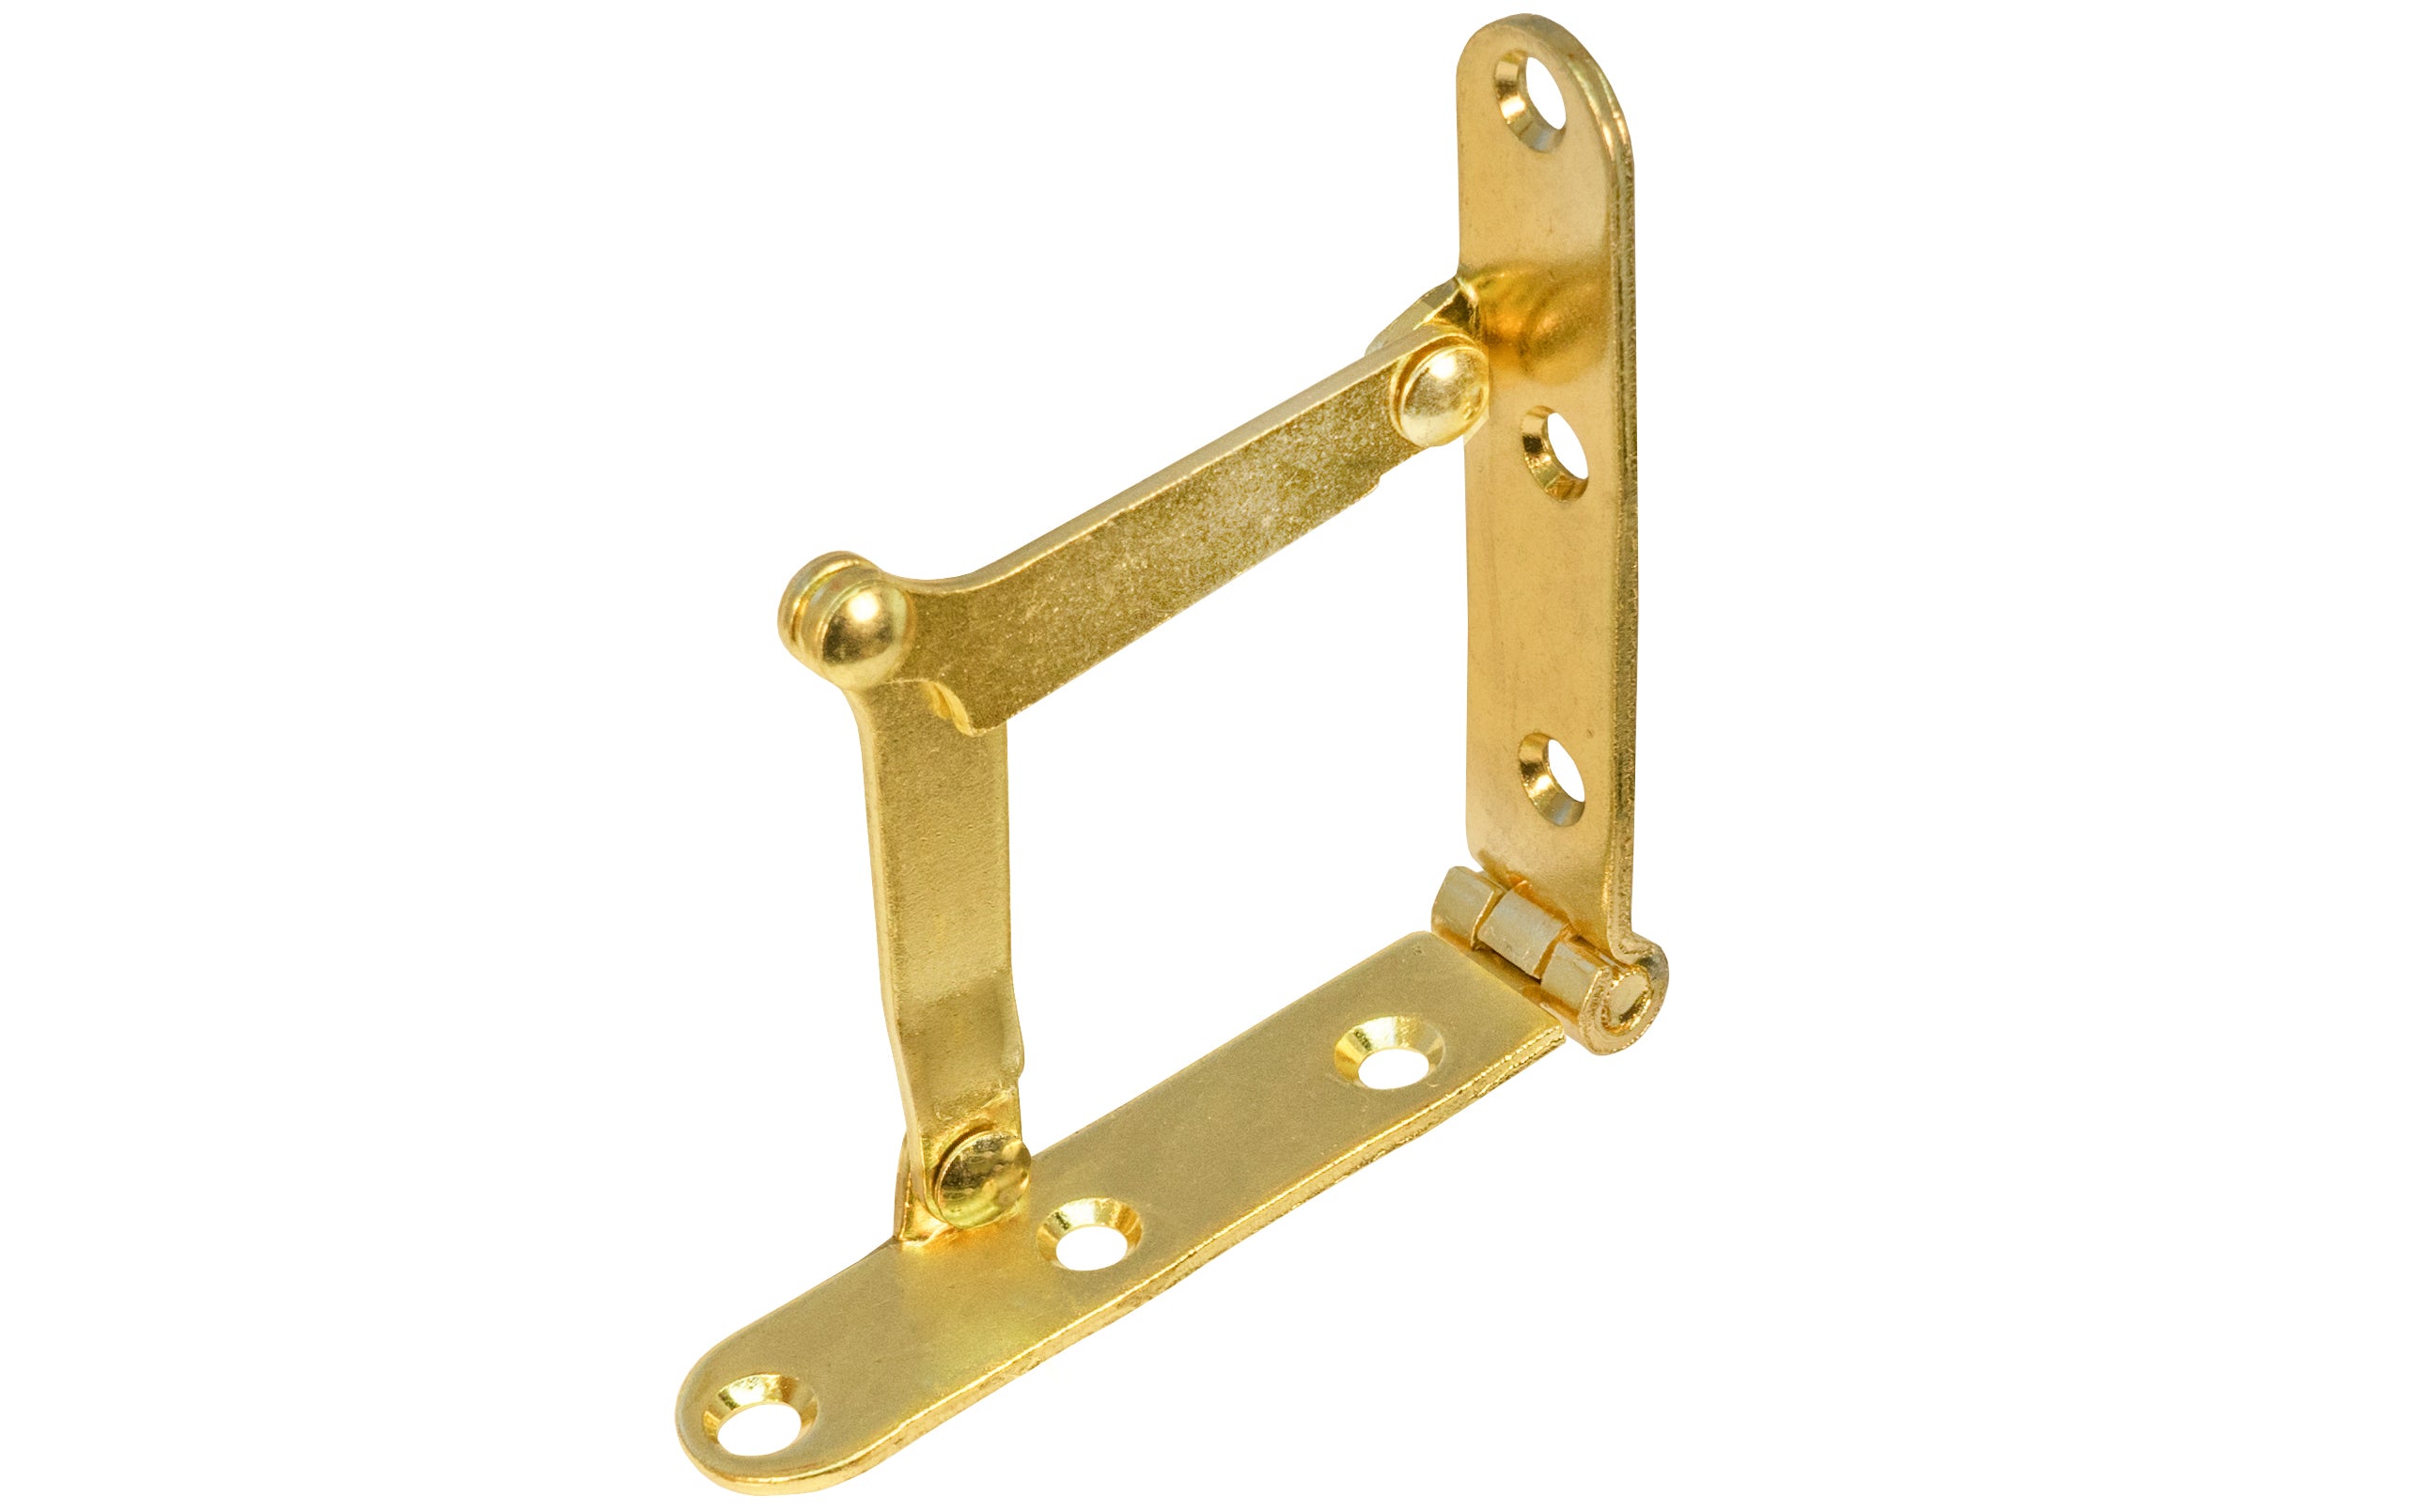 A slant top hinge for use on drop doors on desks, secretary desks, lids, & other uses too. Made of steel material with a plated brass finish. These hinges may also be used with regular lid supports for added extra strength as well. A classic & traditional style desk & lid hinge.  